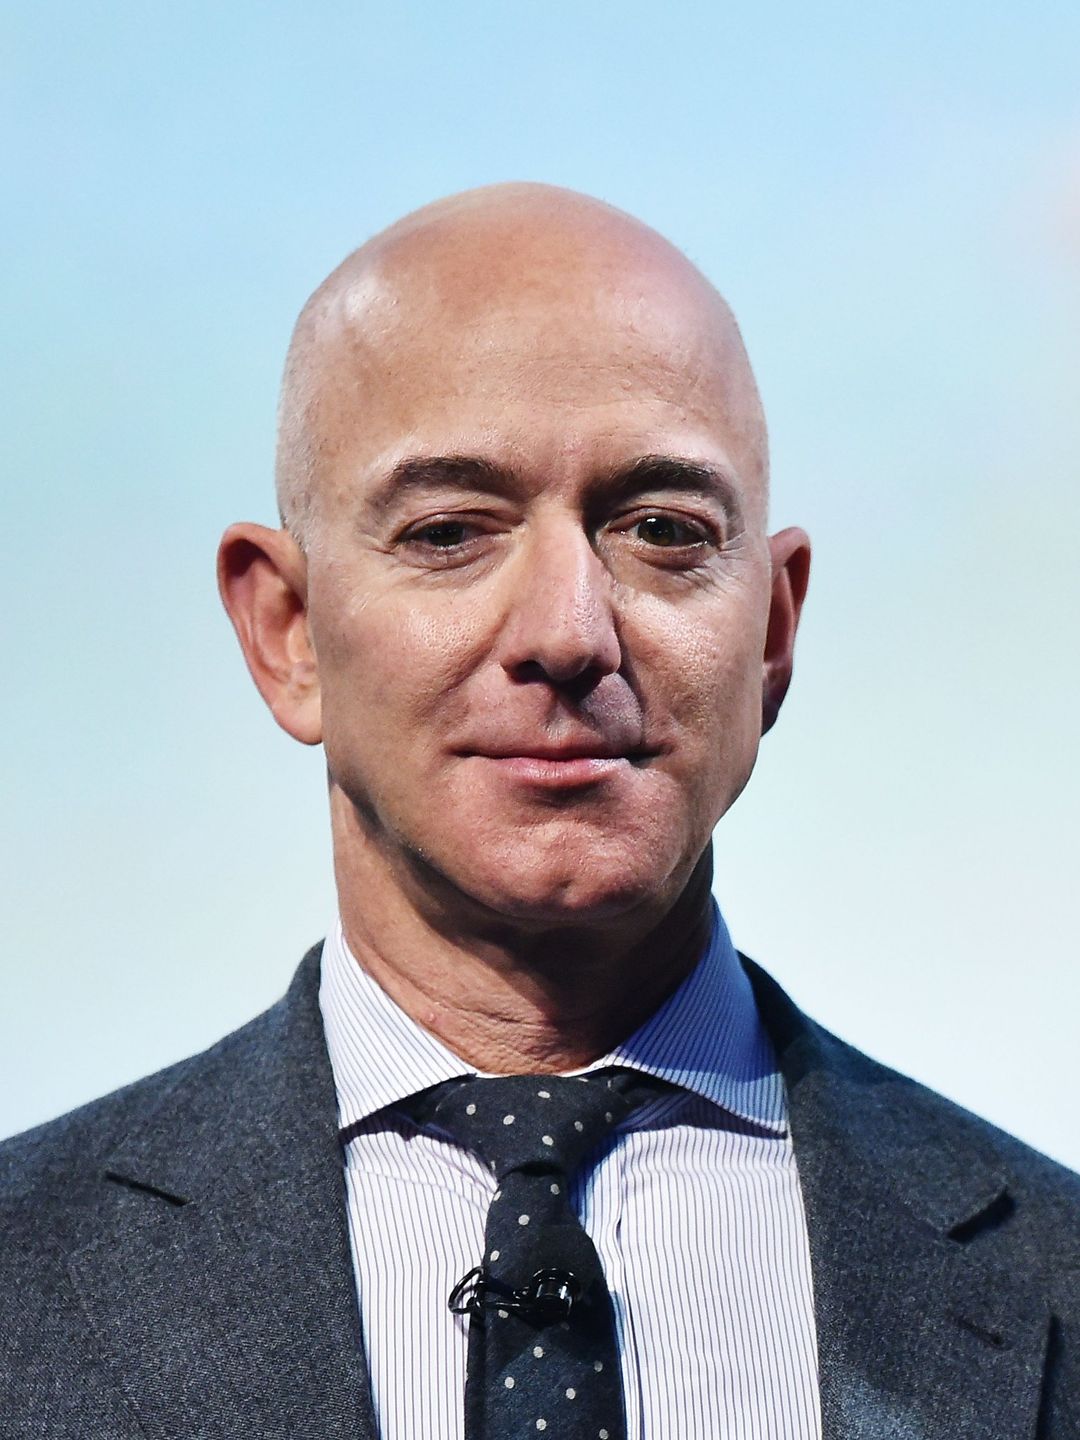 Jeff Bezos does he have kids